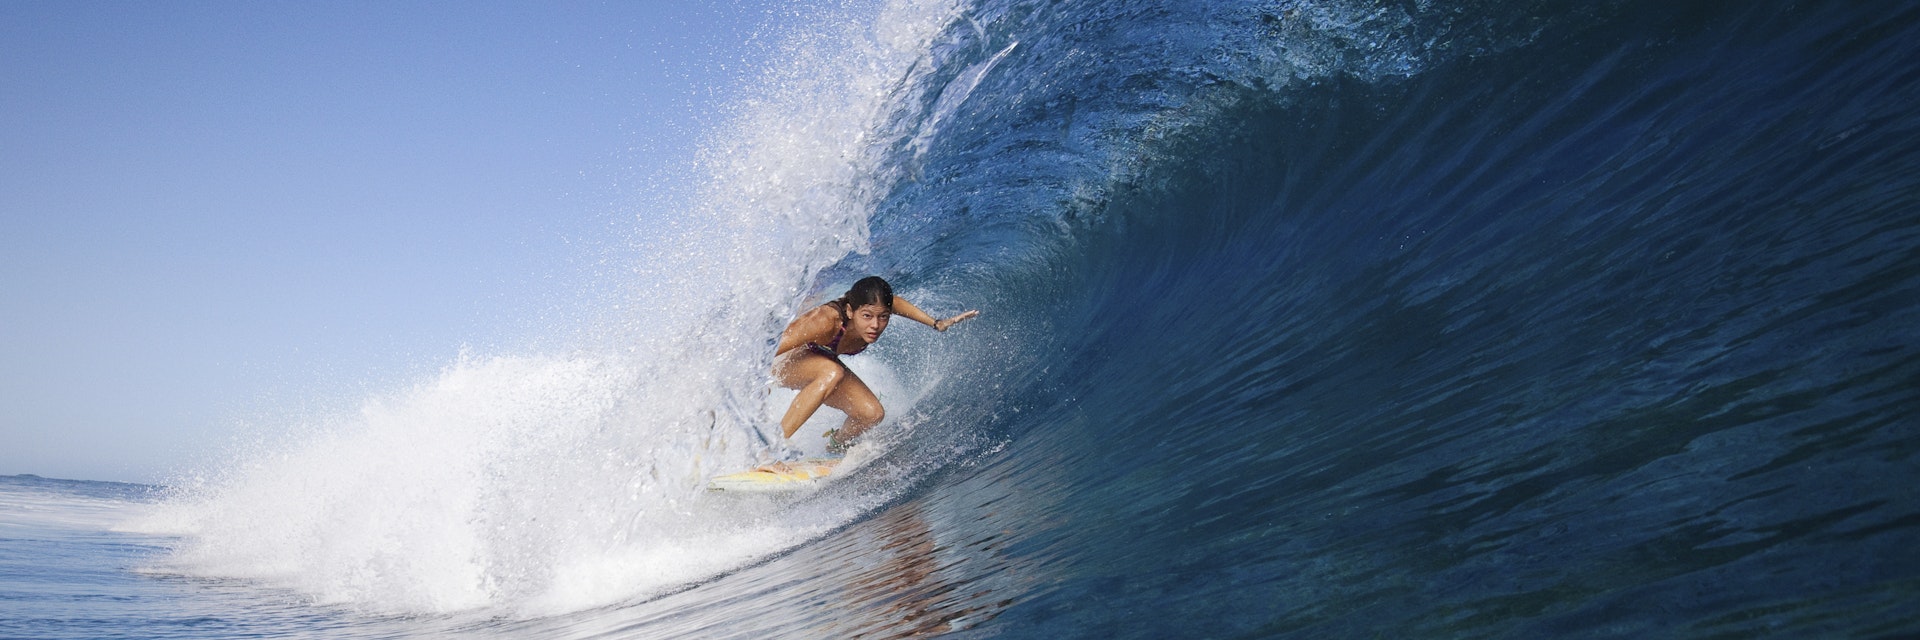 Woman surfing in crest of wave